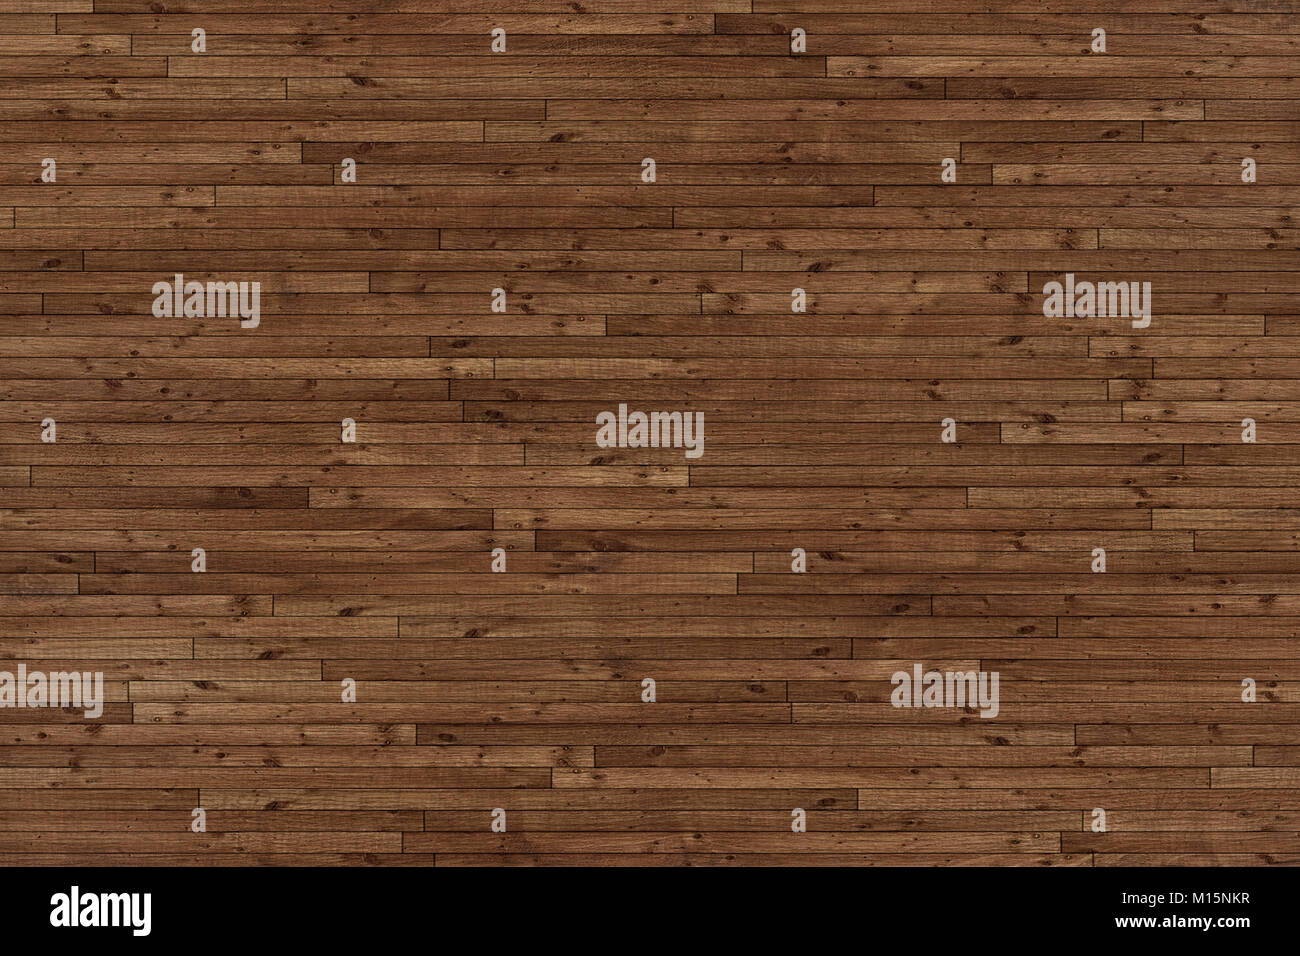 Planks Background, wooden boards backgrounds Stock Photo